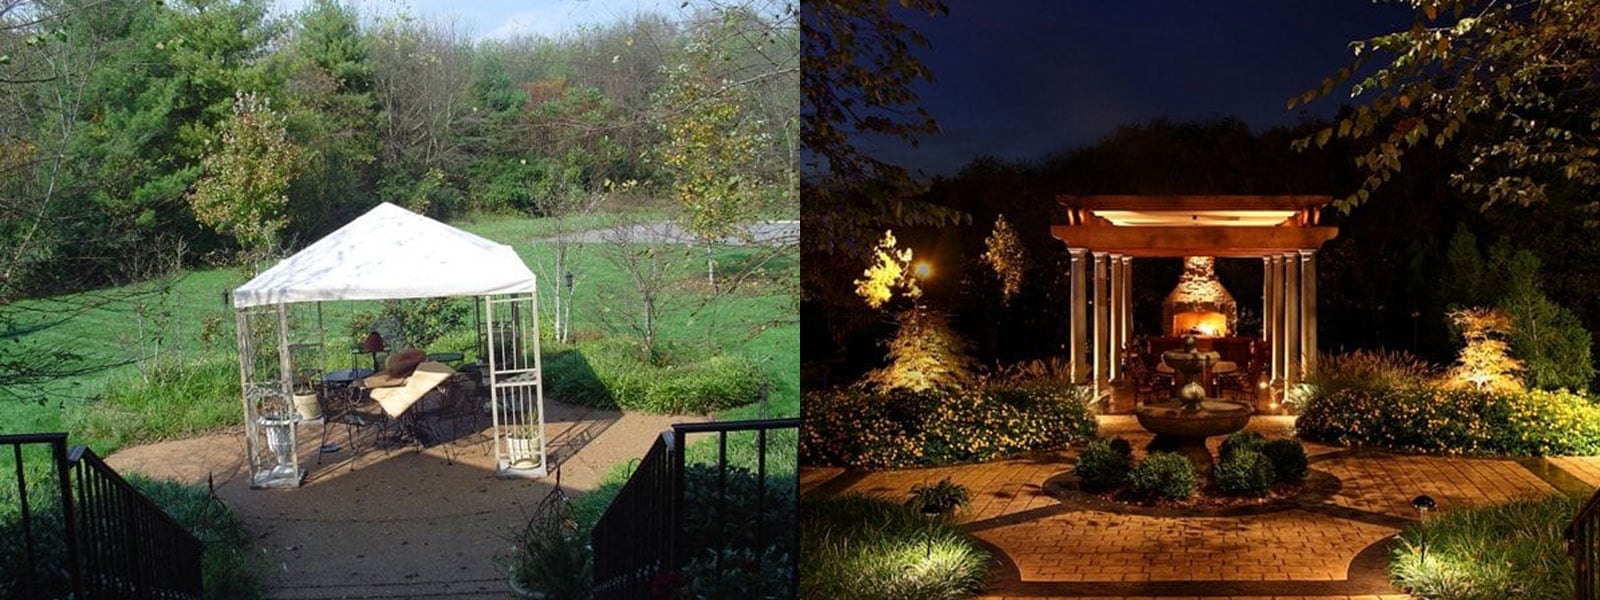 Backyard Landscaping Before and After